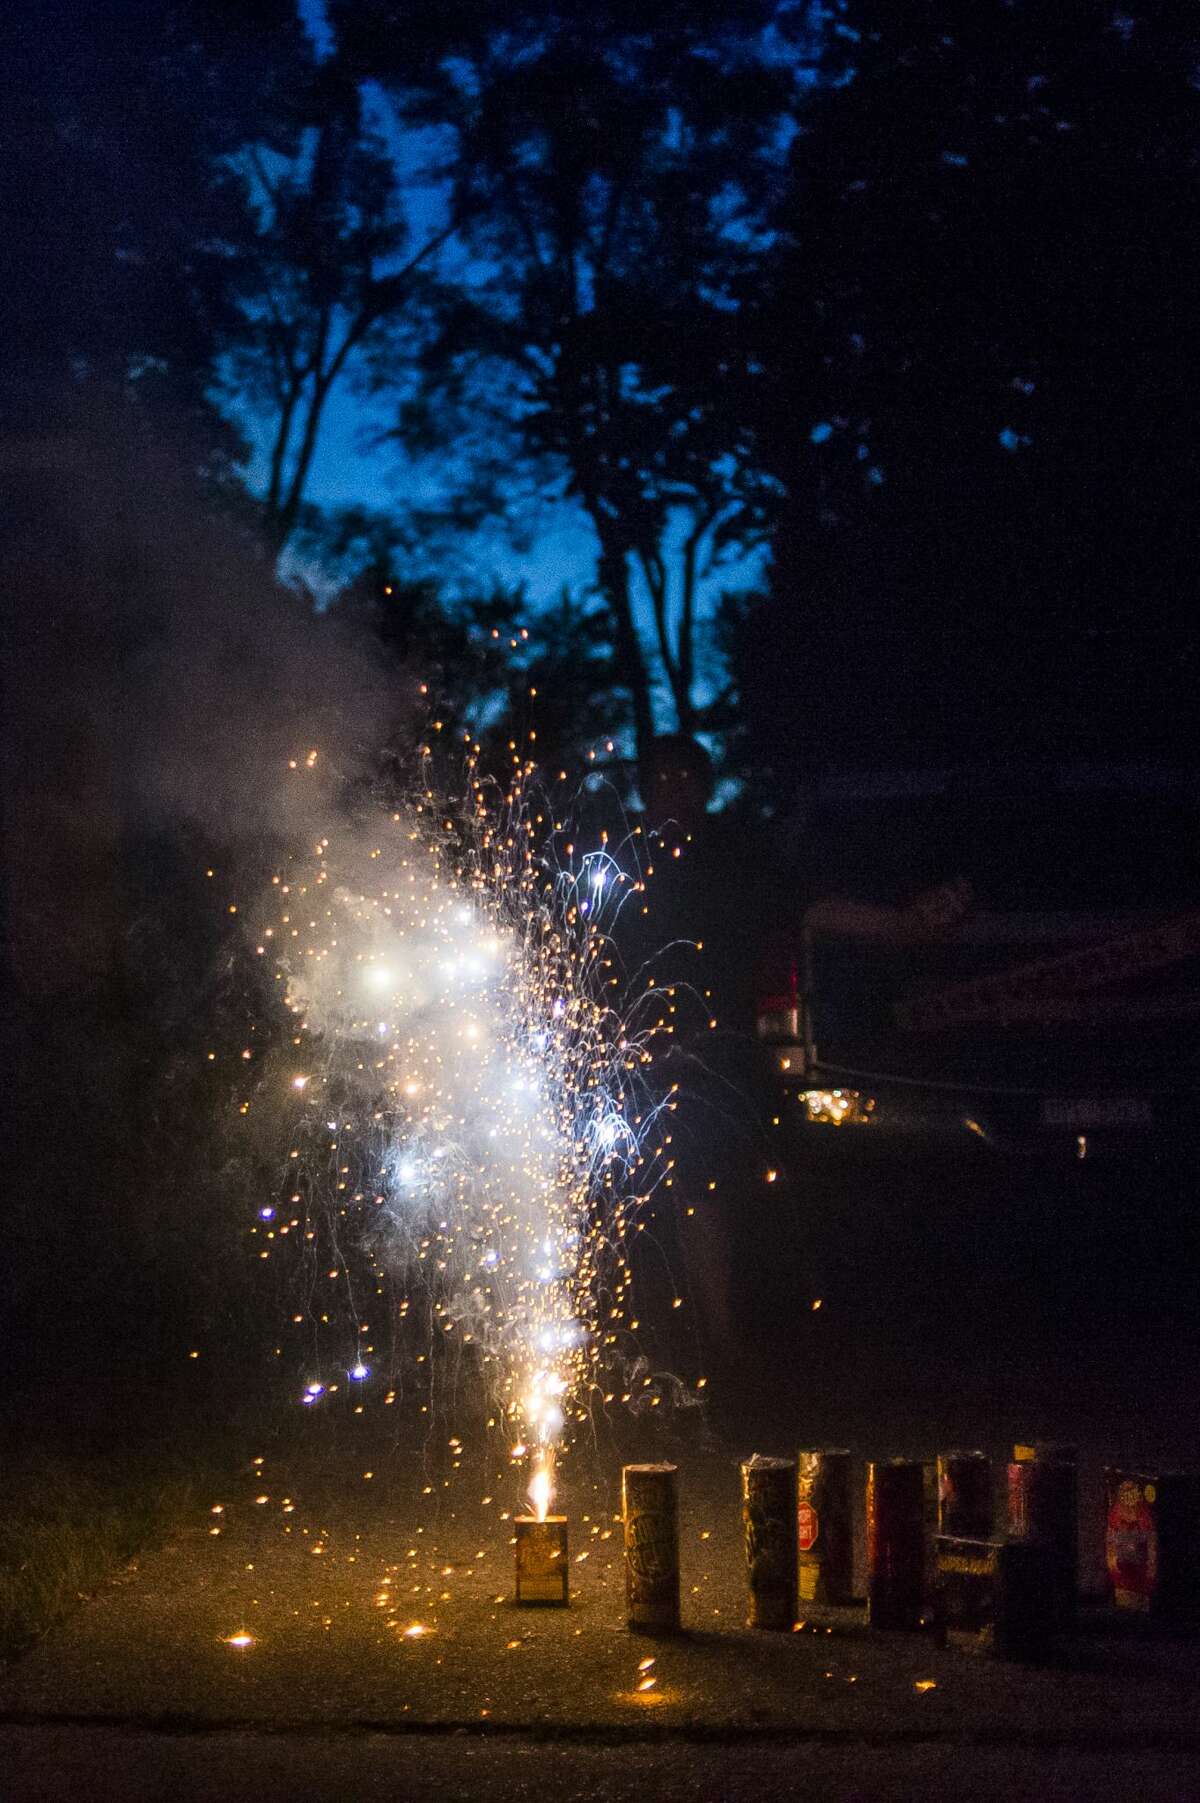 Midland residents set off fireworks at their homes in celebration of Independence Day Saturday, July 4, 2020. (Katy Kildee/kkildee@mdn.net)